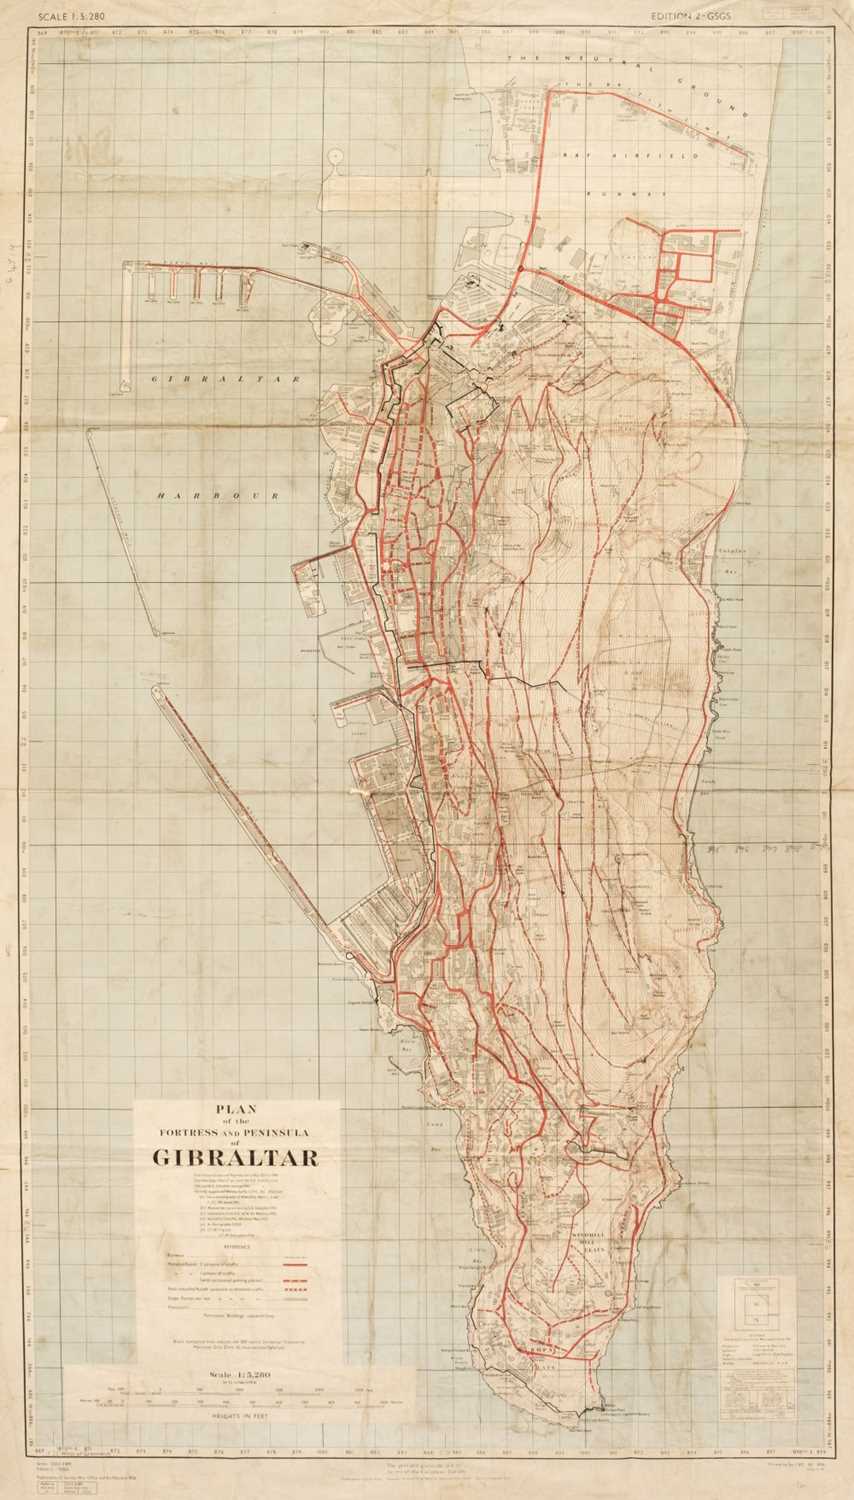 Lot 24 - Gibraltar. Plan of the Fortress and Peninsula of Gibraltar, War Office & Air Ministry, 1956